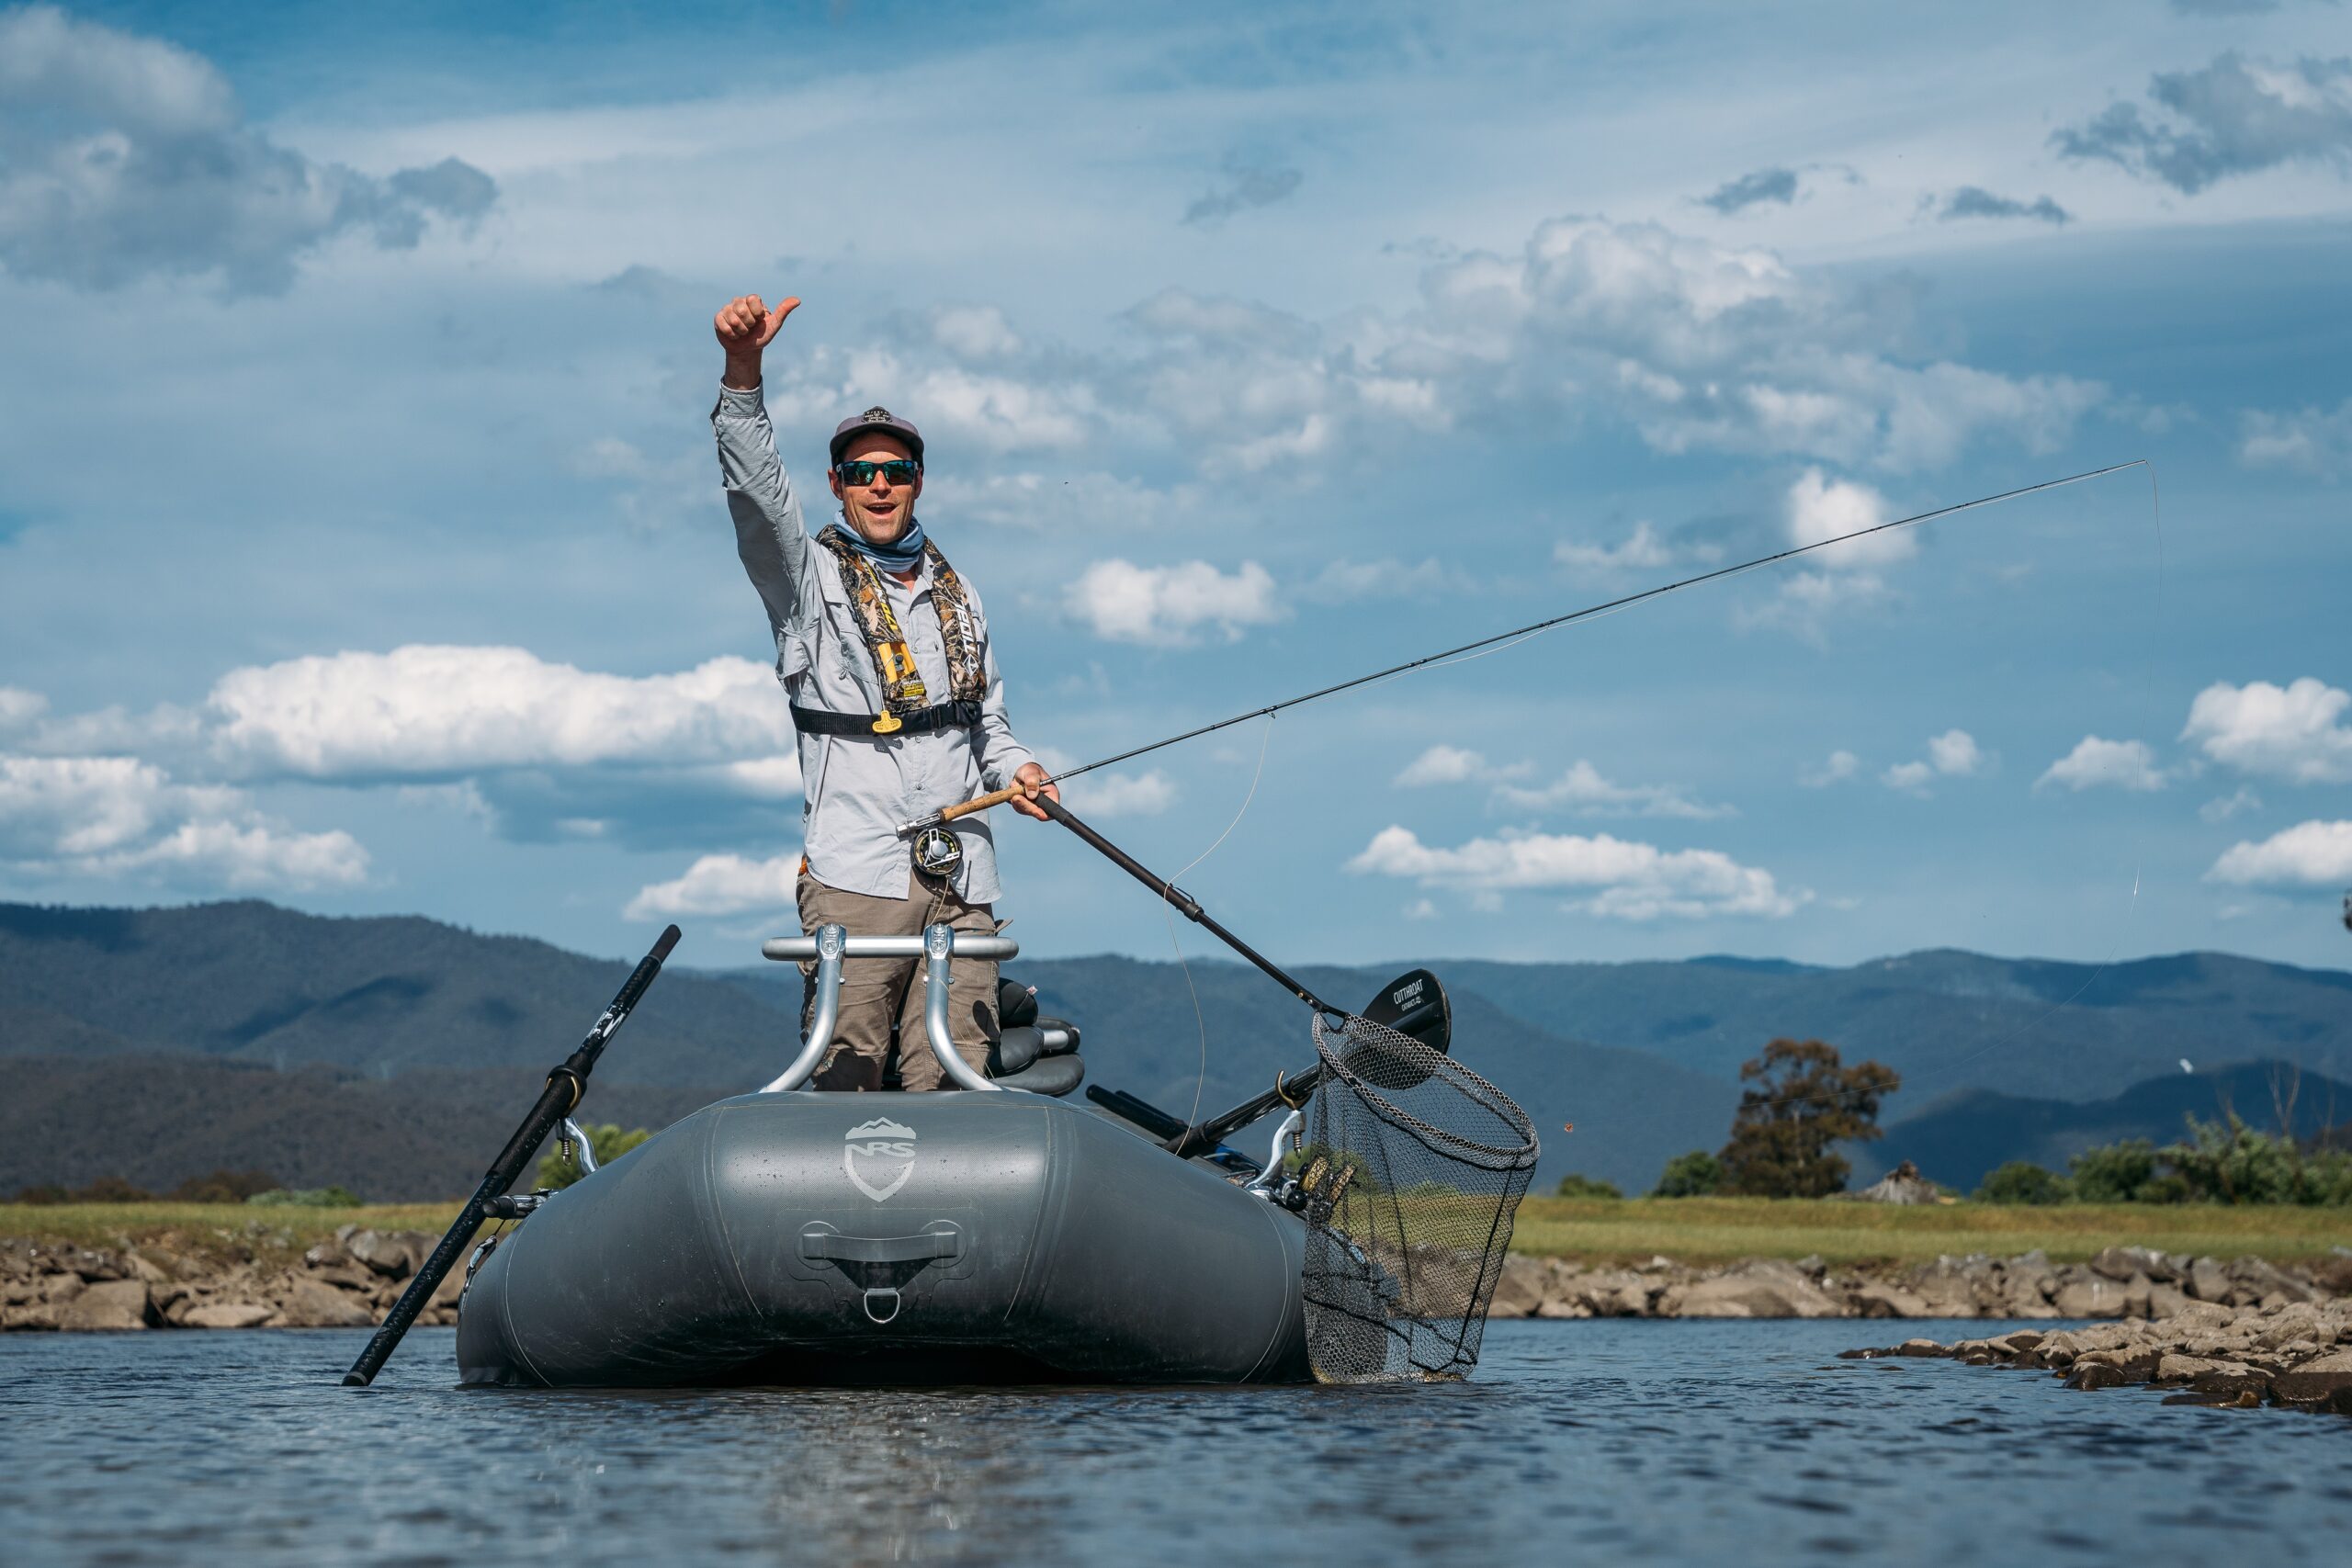 Drift boat fly fishing on the Swampy Plains River with Snowy Valleys Fly Fishing. Image by Jimmy Barwick.